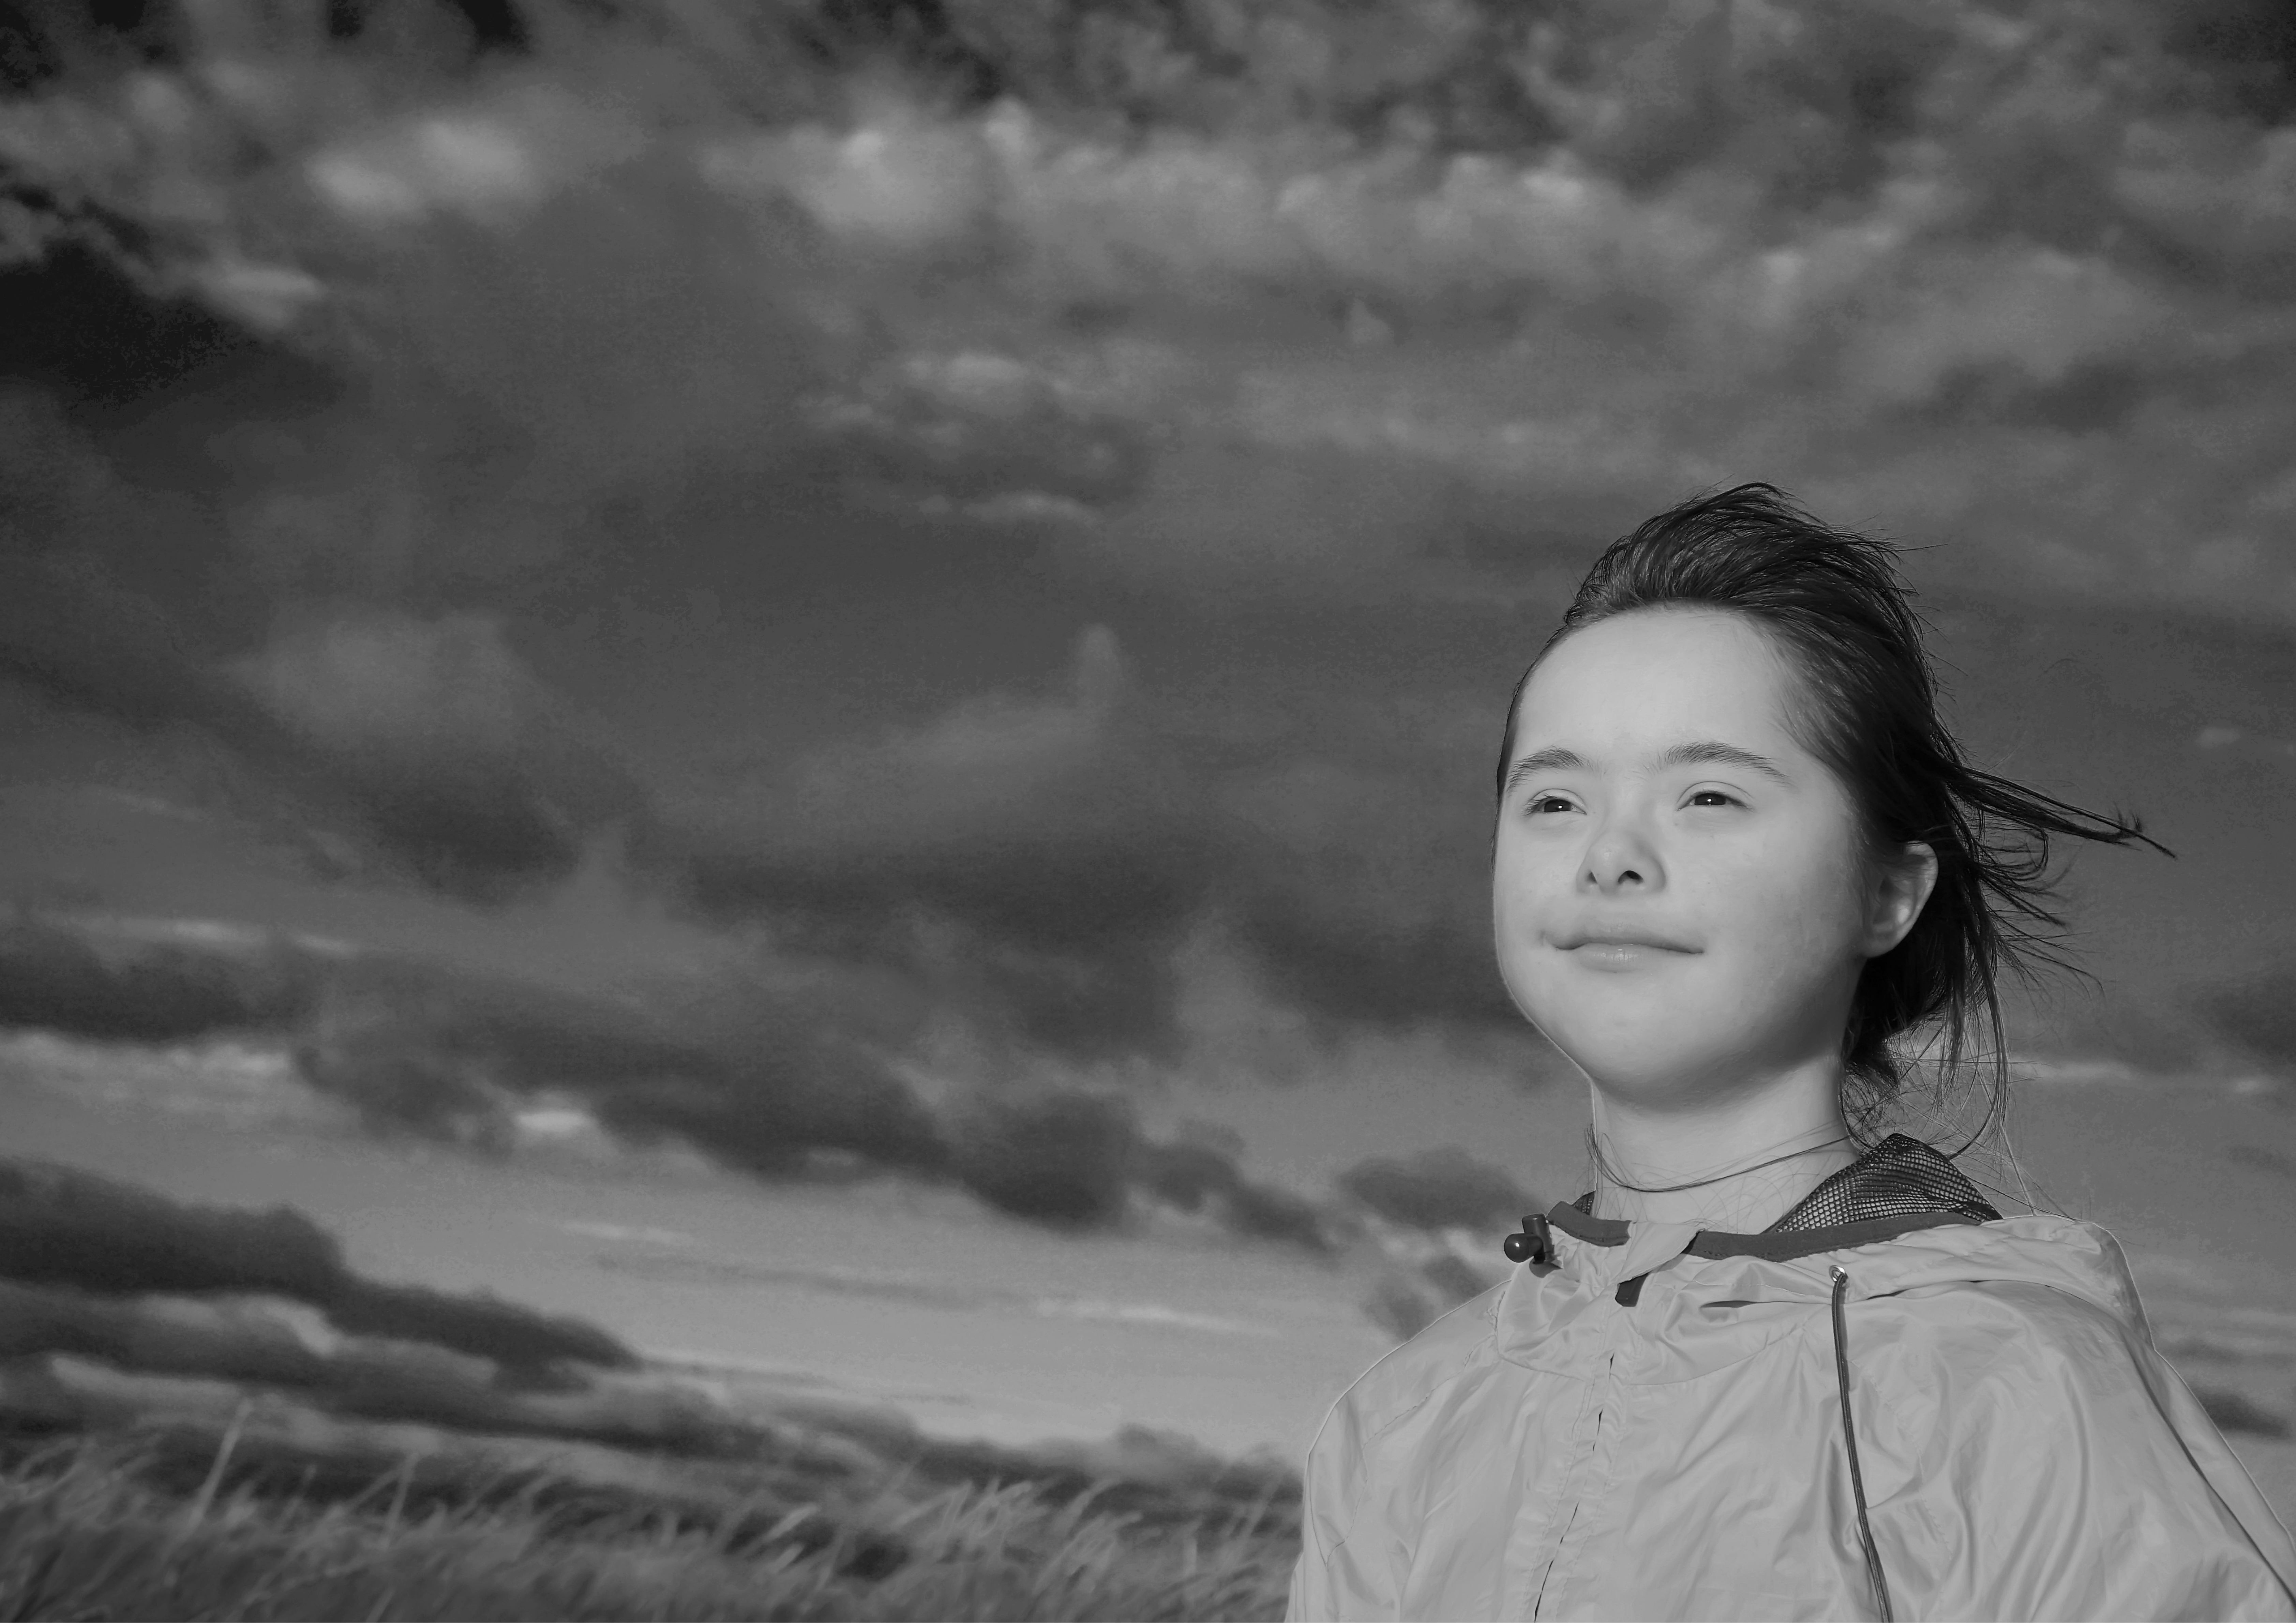 Looking slightly up at a young person who is standing in a field and looking upwards with a content look on their face. A dramatic dark cloudy sky fills most of the frame.